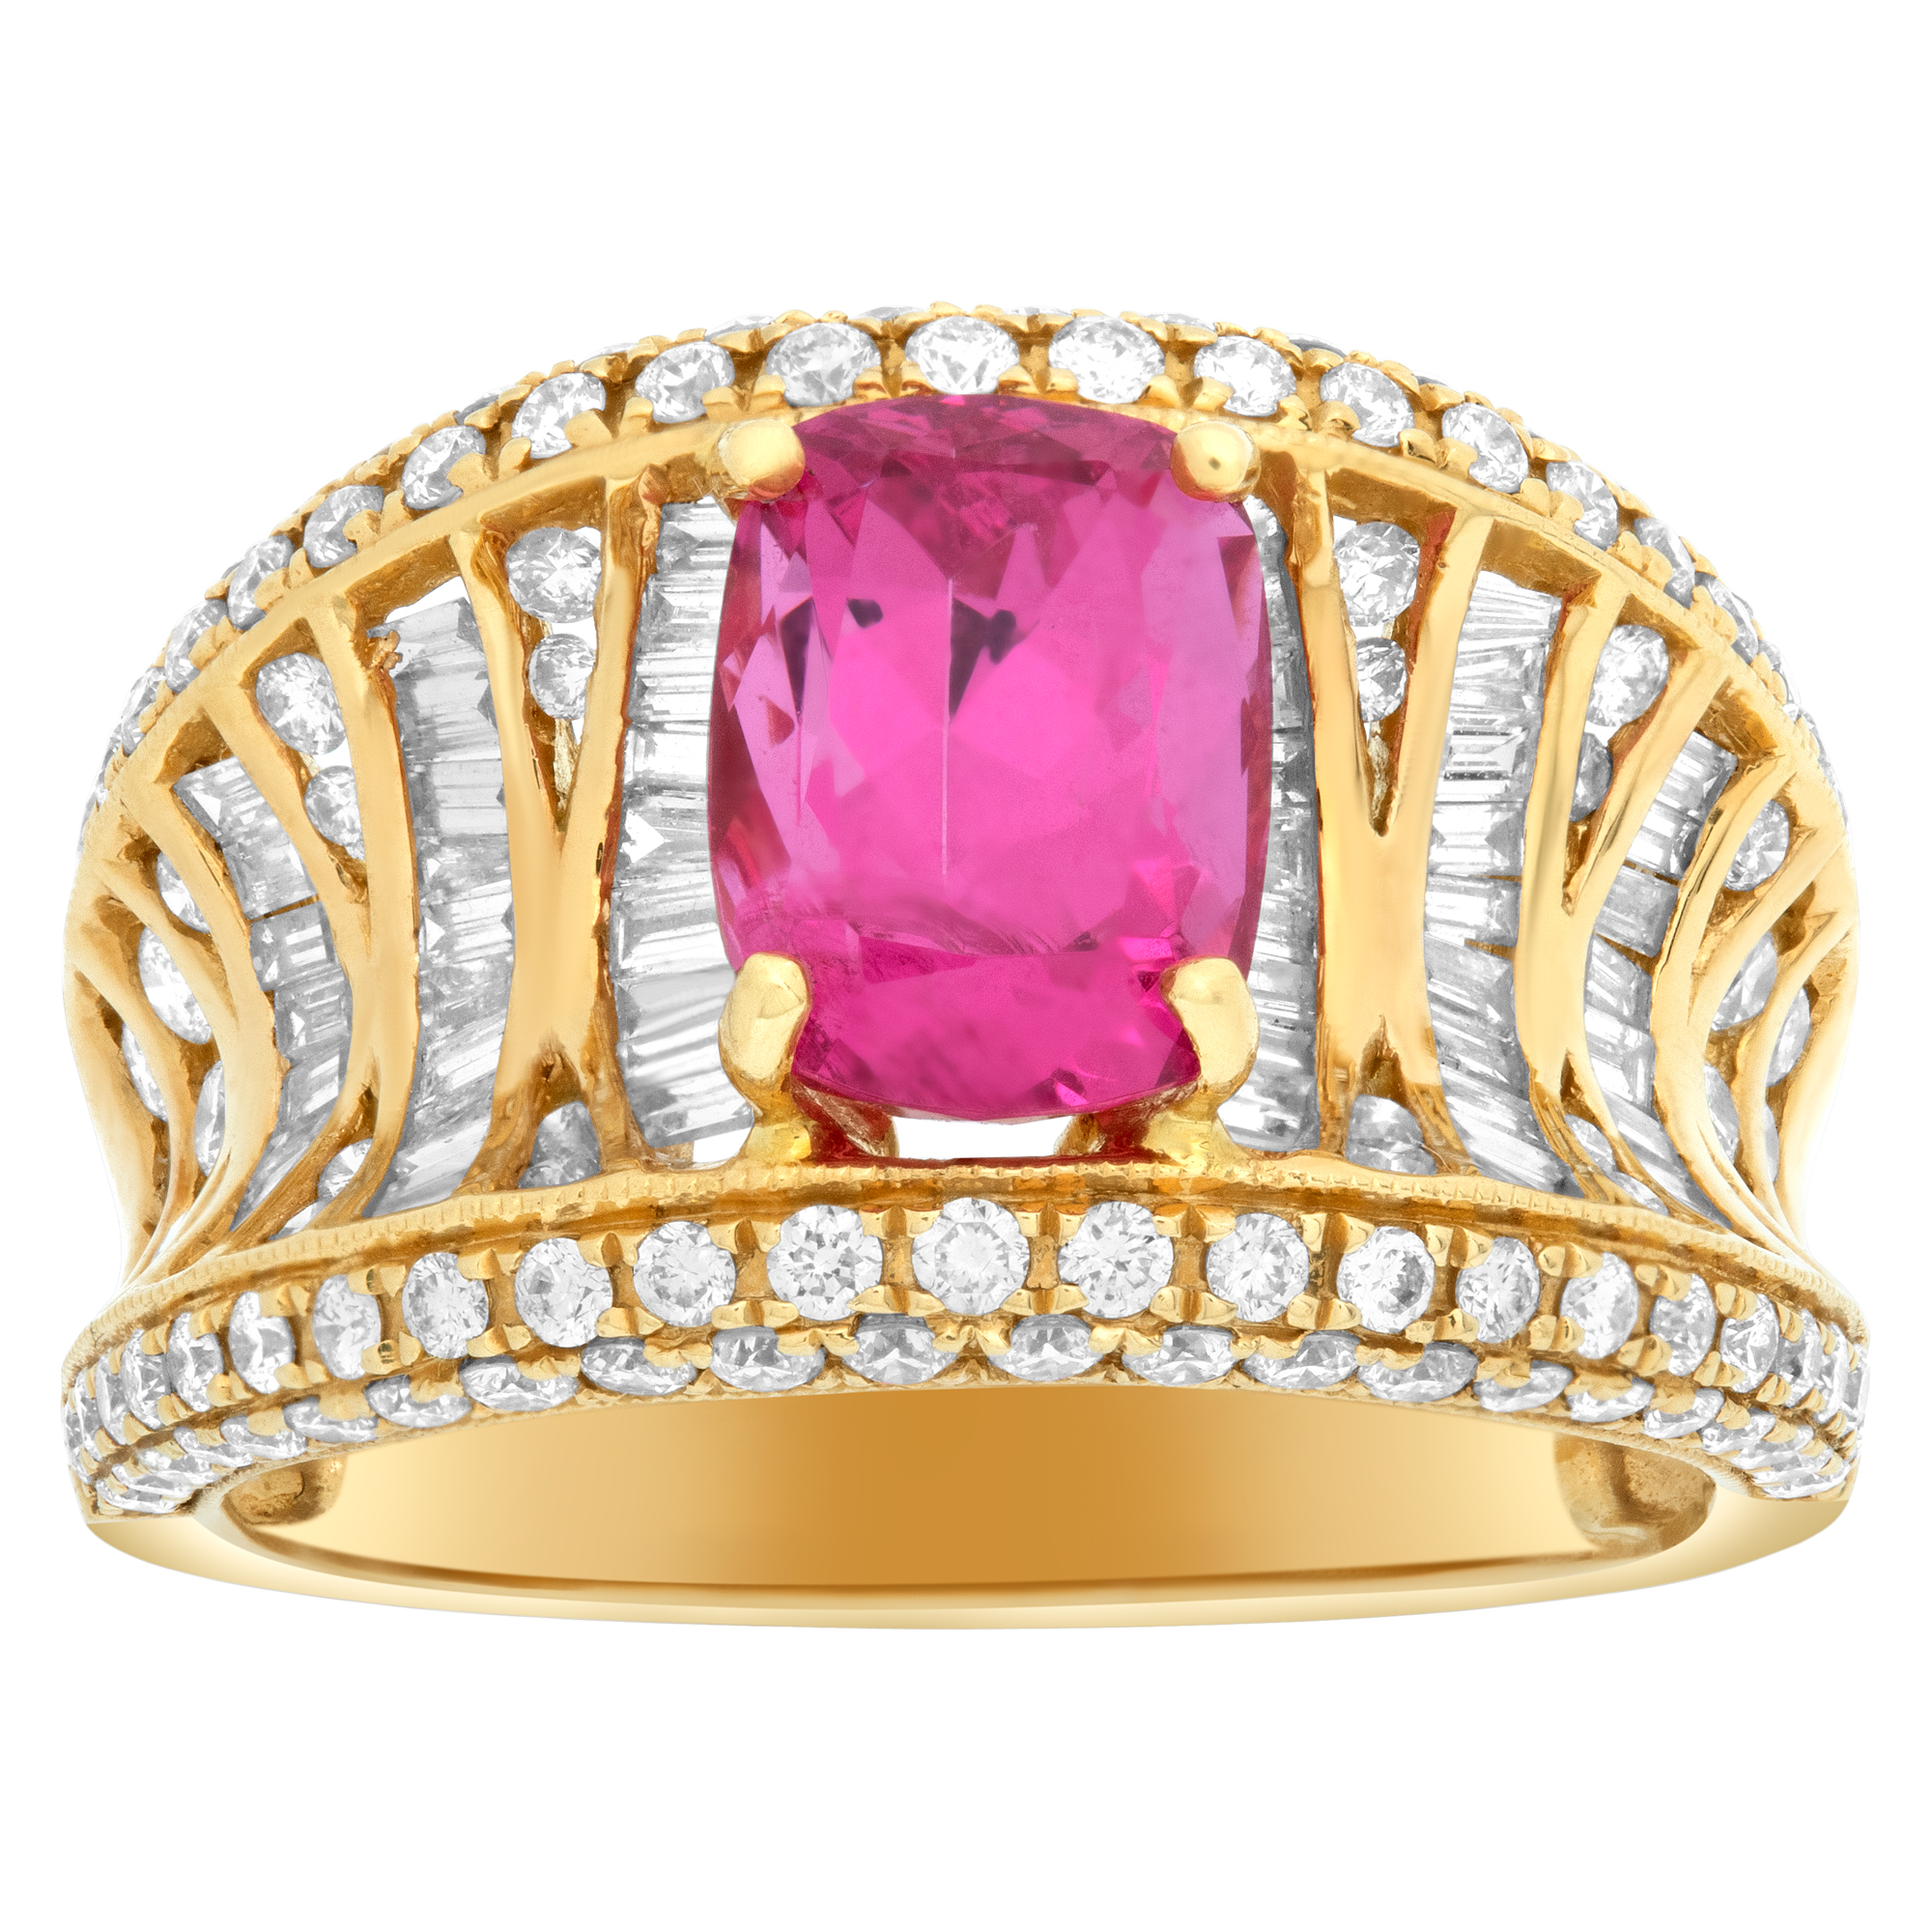 Oval brilliant cut pink spinel (2.73 carats) & diamonds ring set in 18k yellow gold image 1